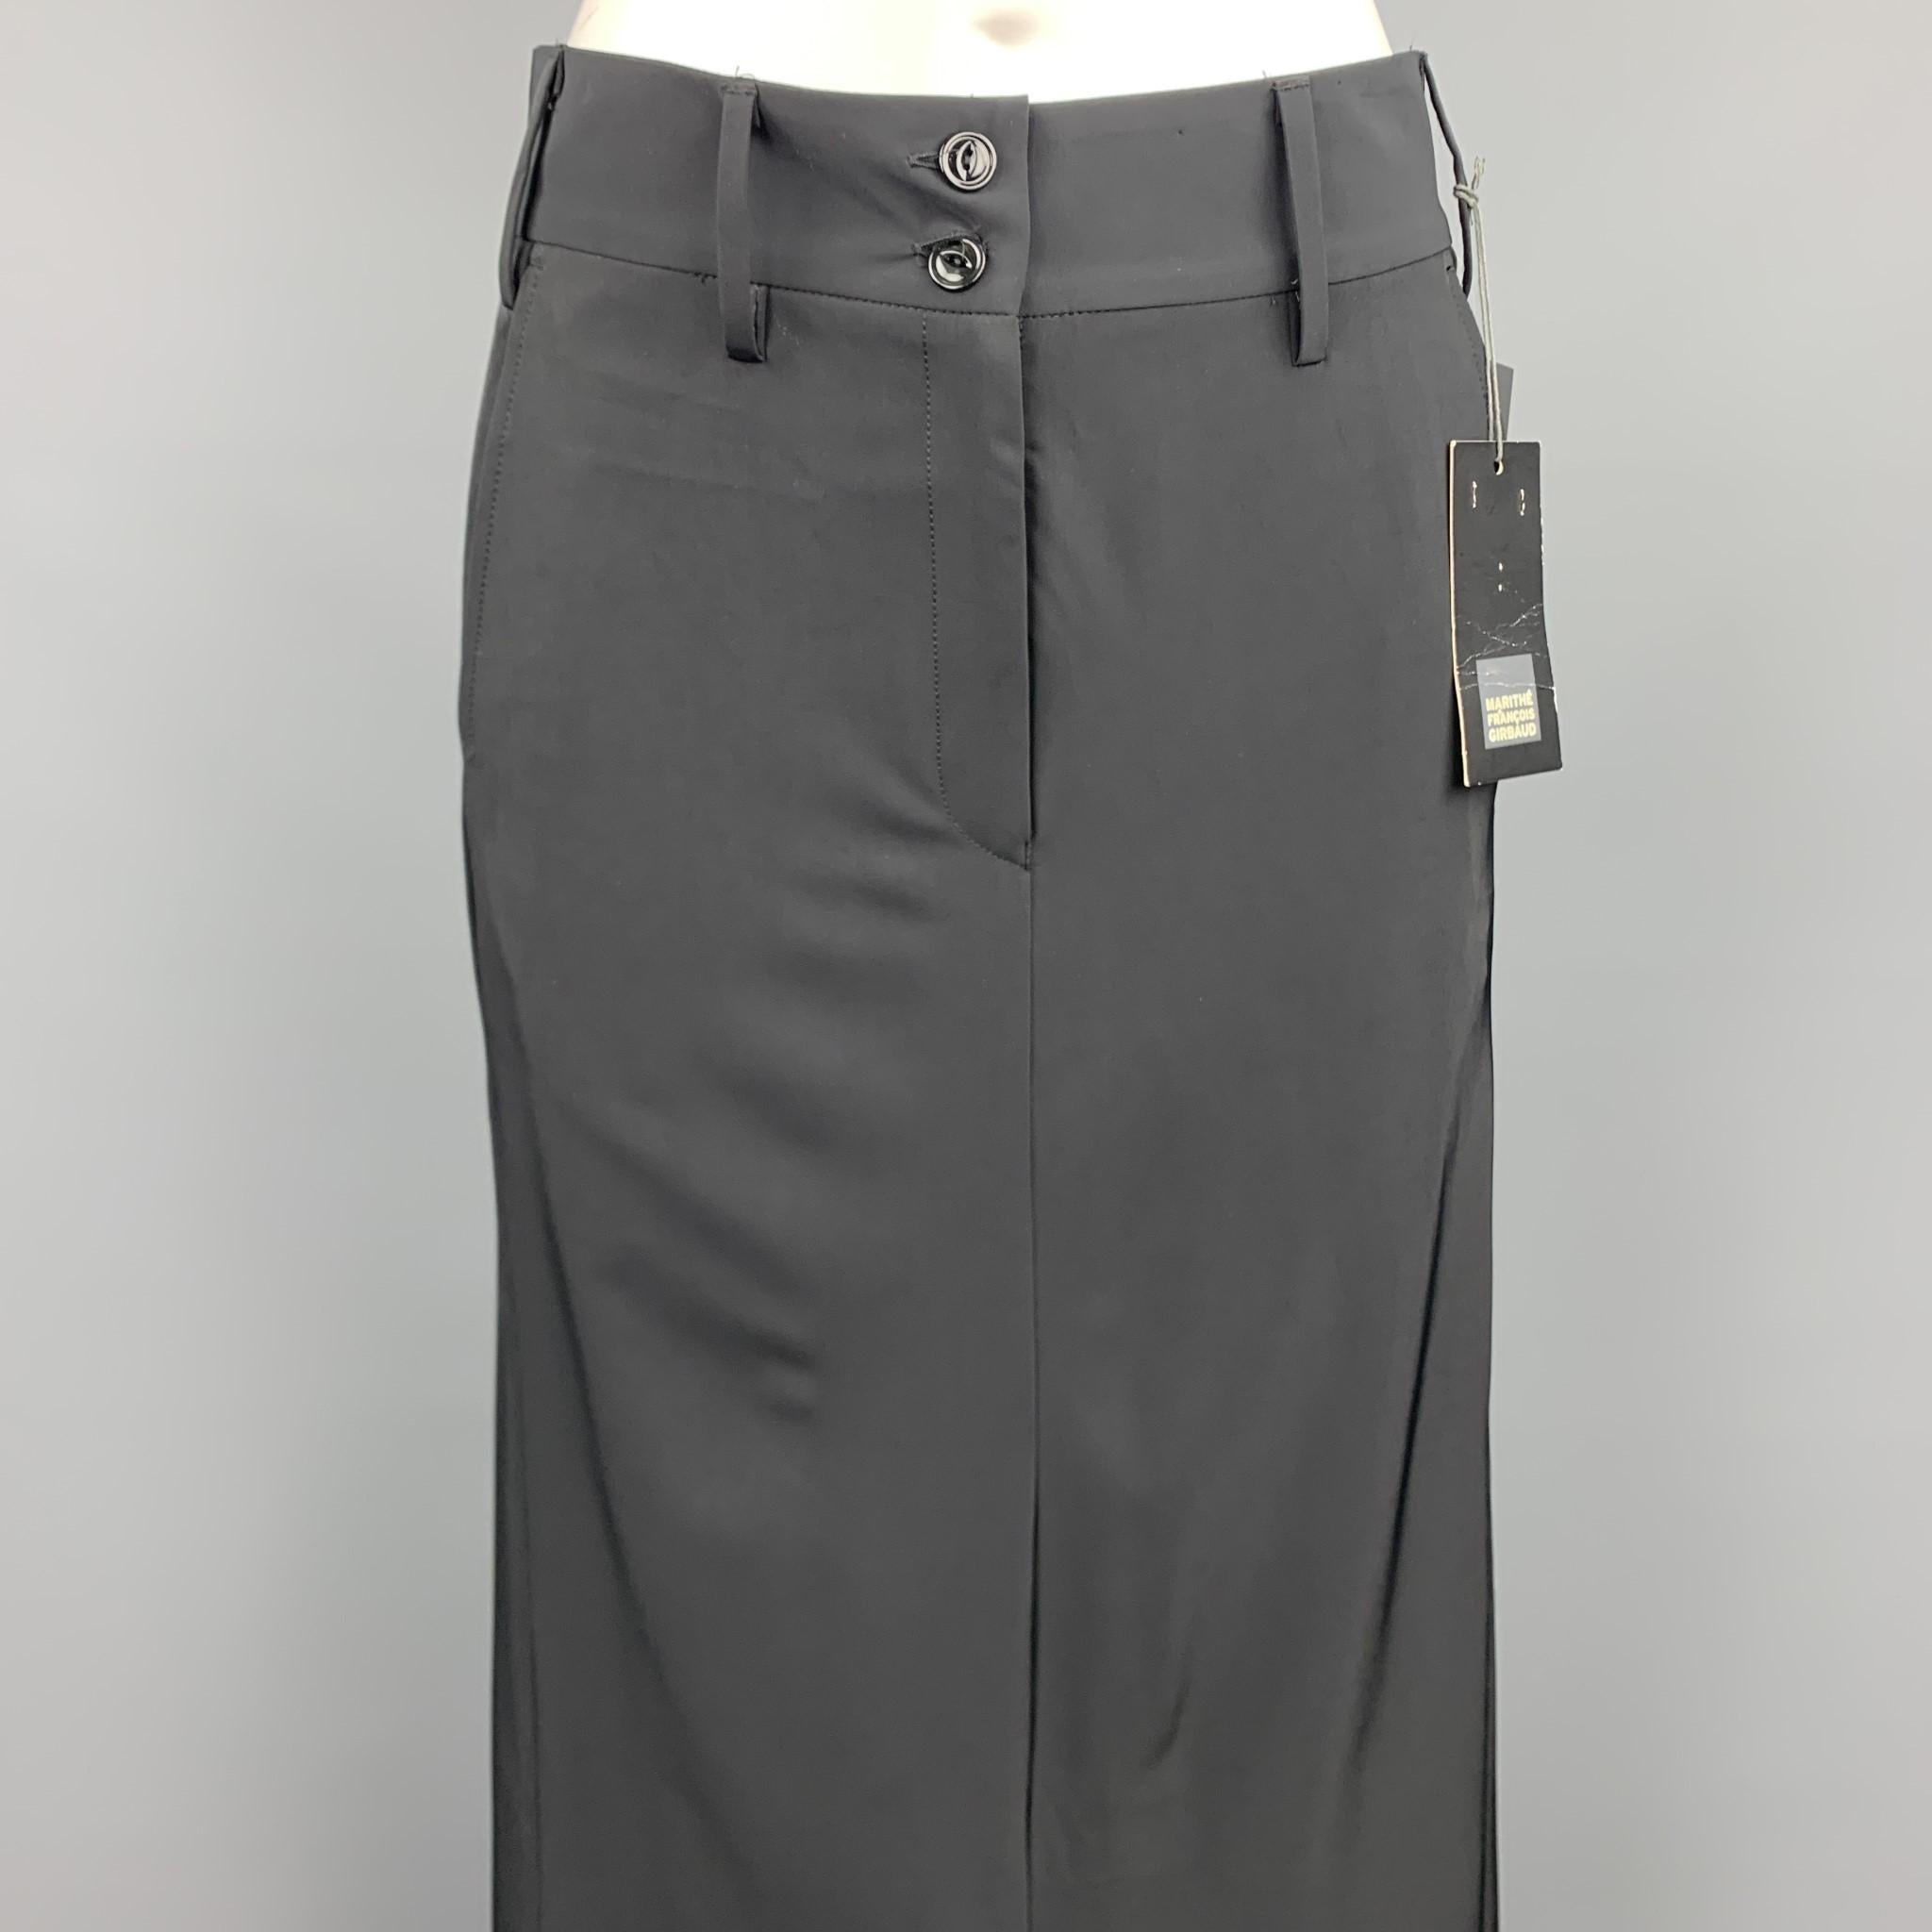 MARITHE+FRANCOIS GIRBAUD long skirt comes in a black polyester blend featuring a black slit, back belt detail, and a zip fly closure. Made in Italy.

New With Tags.
Marked: IT 42

Measurements:

Waist: 32 in. 
Length: 41 in. 